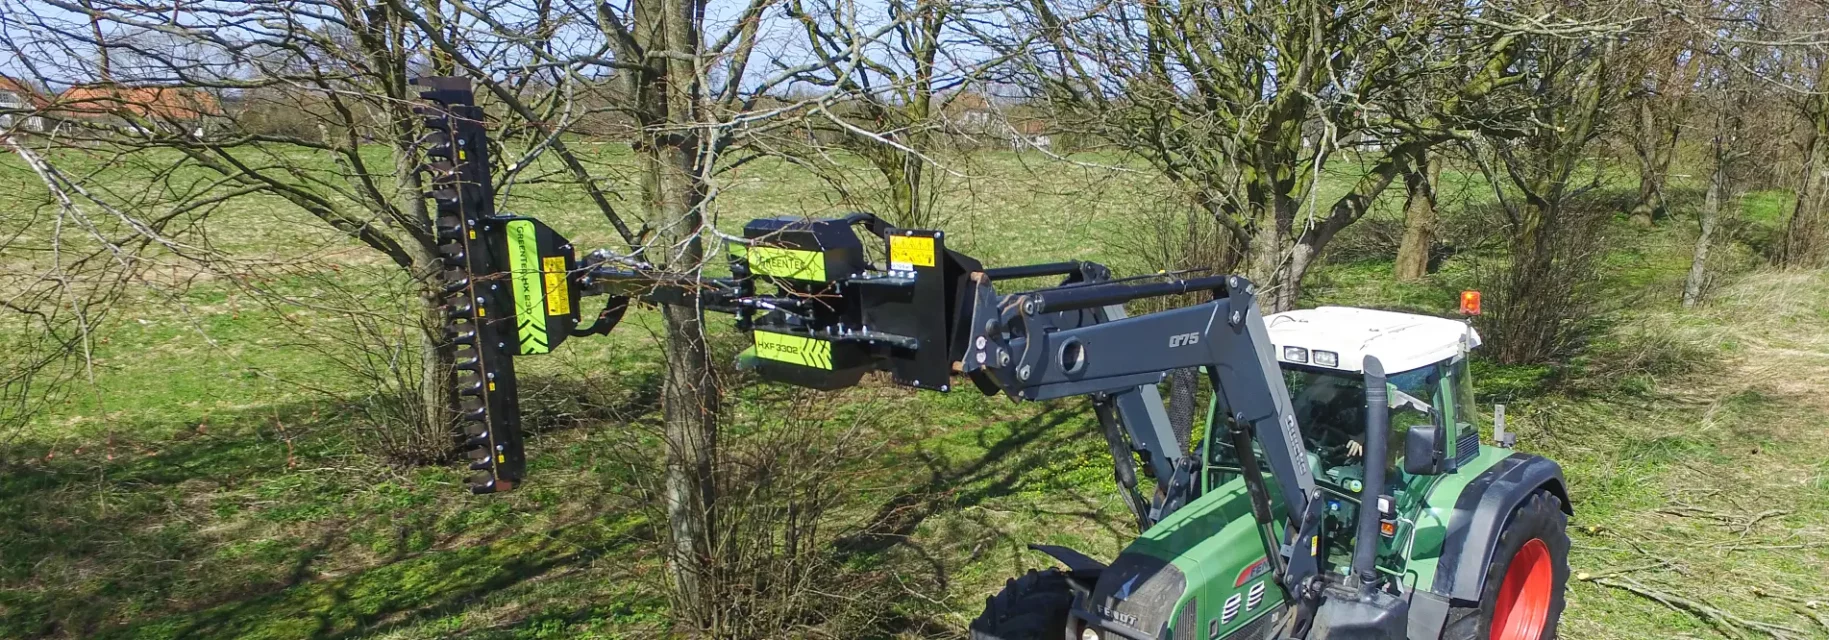 Finger bar hedge cutter for tractor